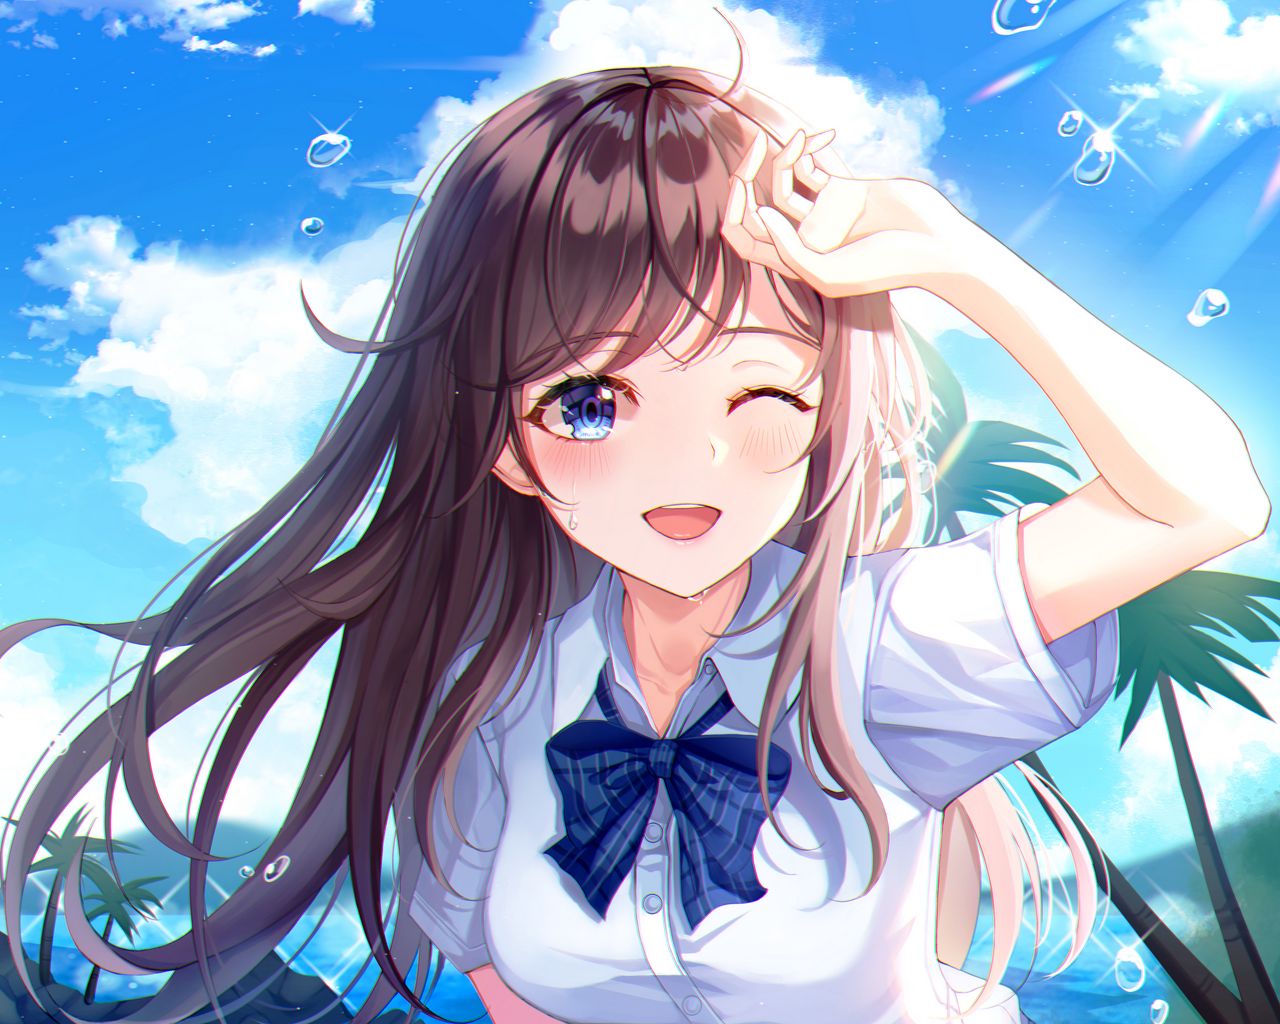 Lexica - Beautiful anime girl with a cute smile